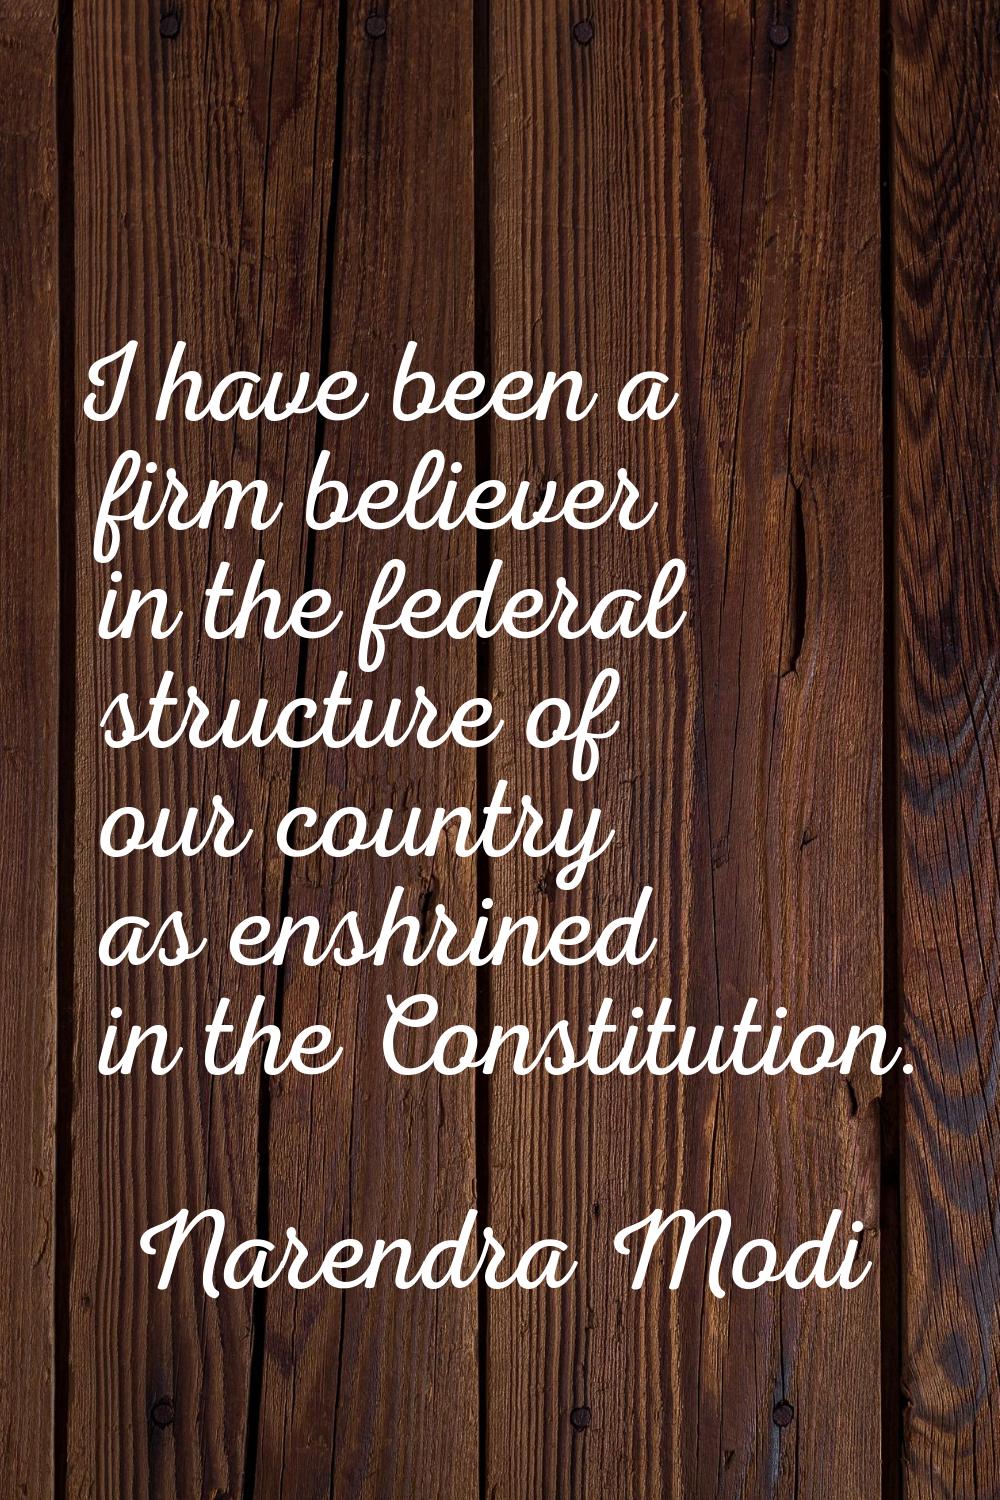 I have been a firm believer in the federal structure of our country as enshrined in the Constitutio